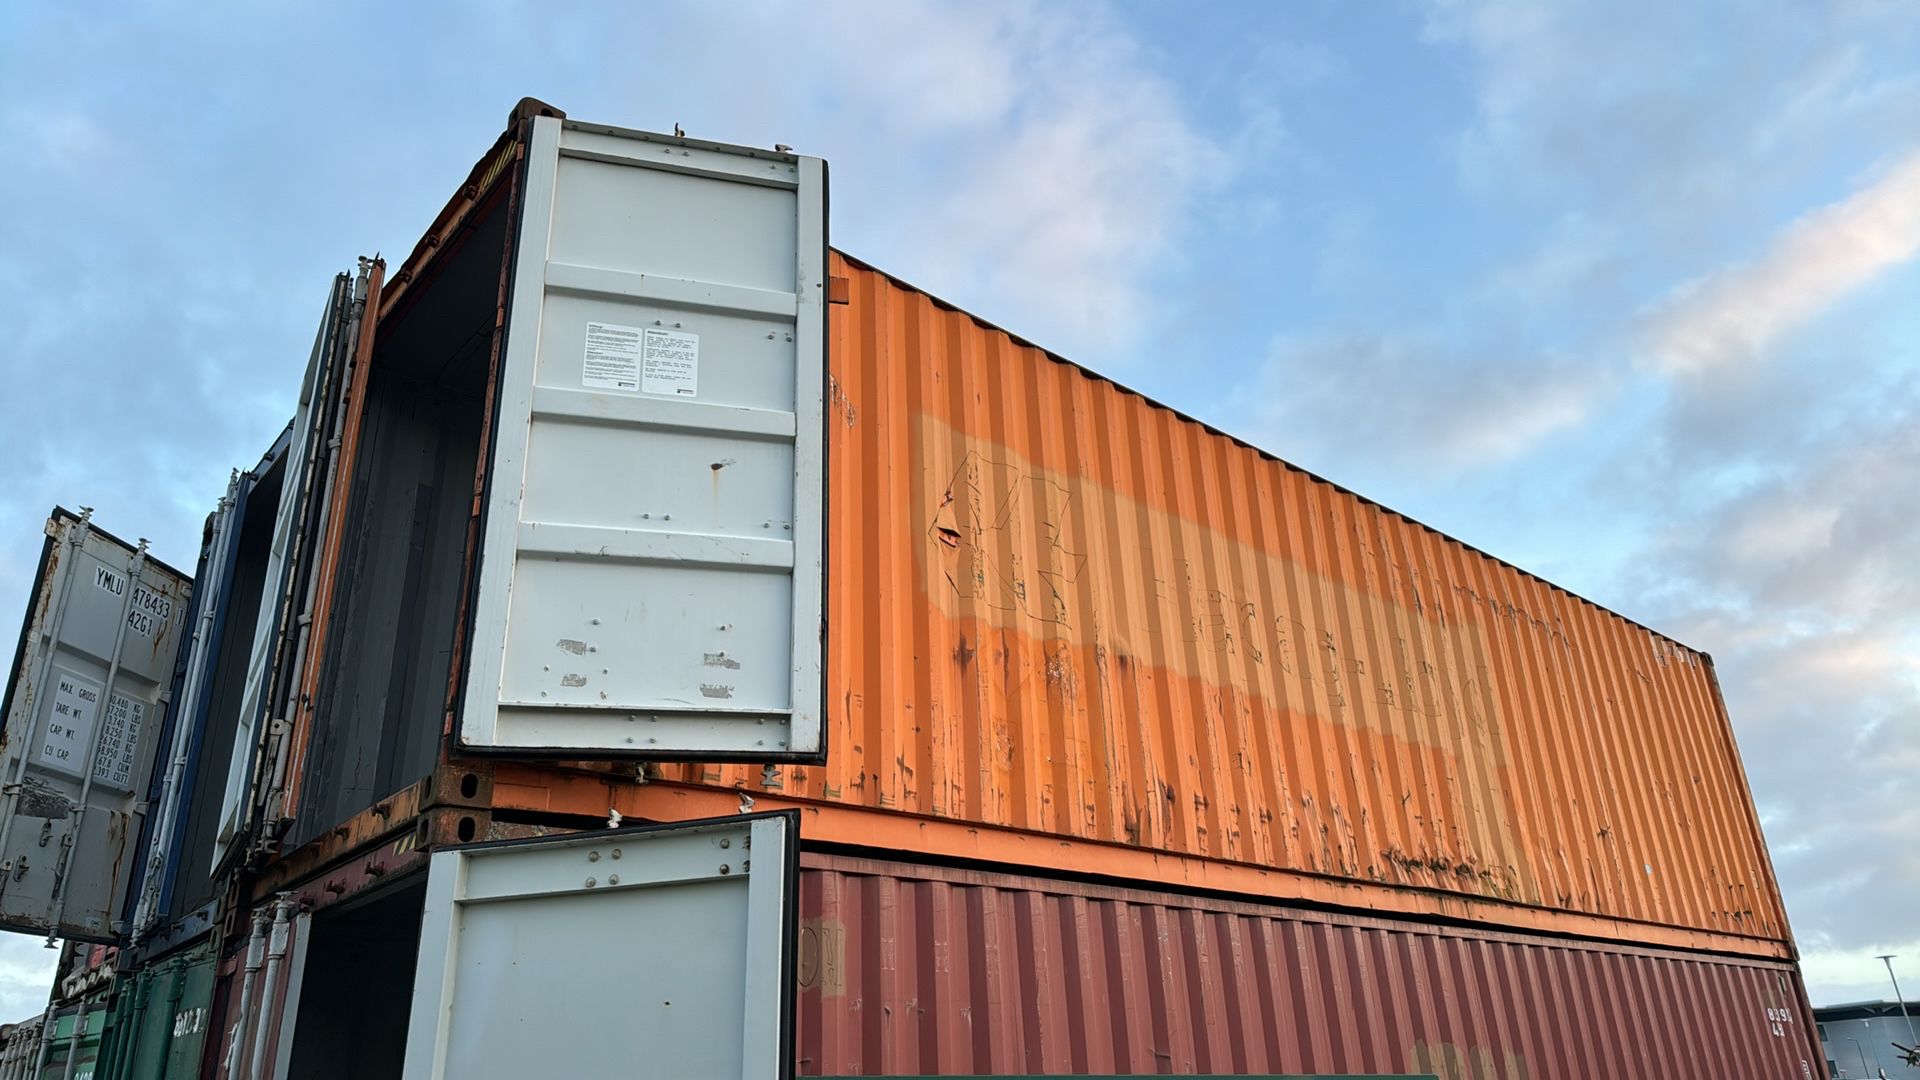 Shipping Container 2 - Image 2 of 2